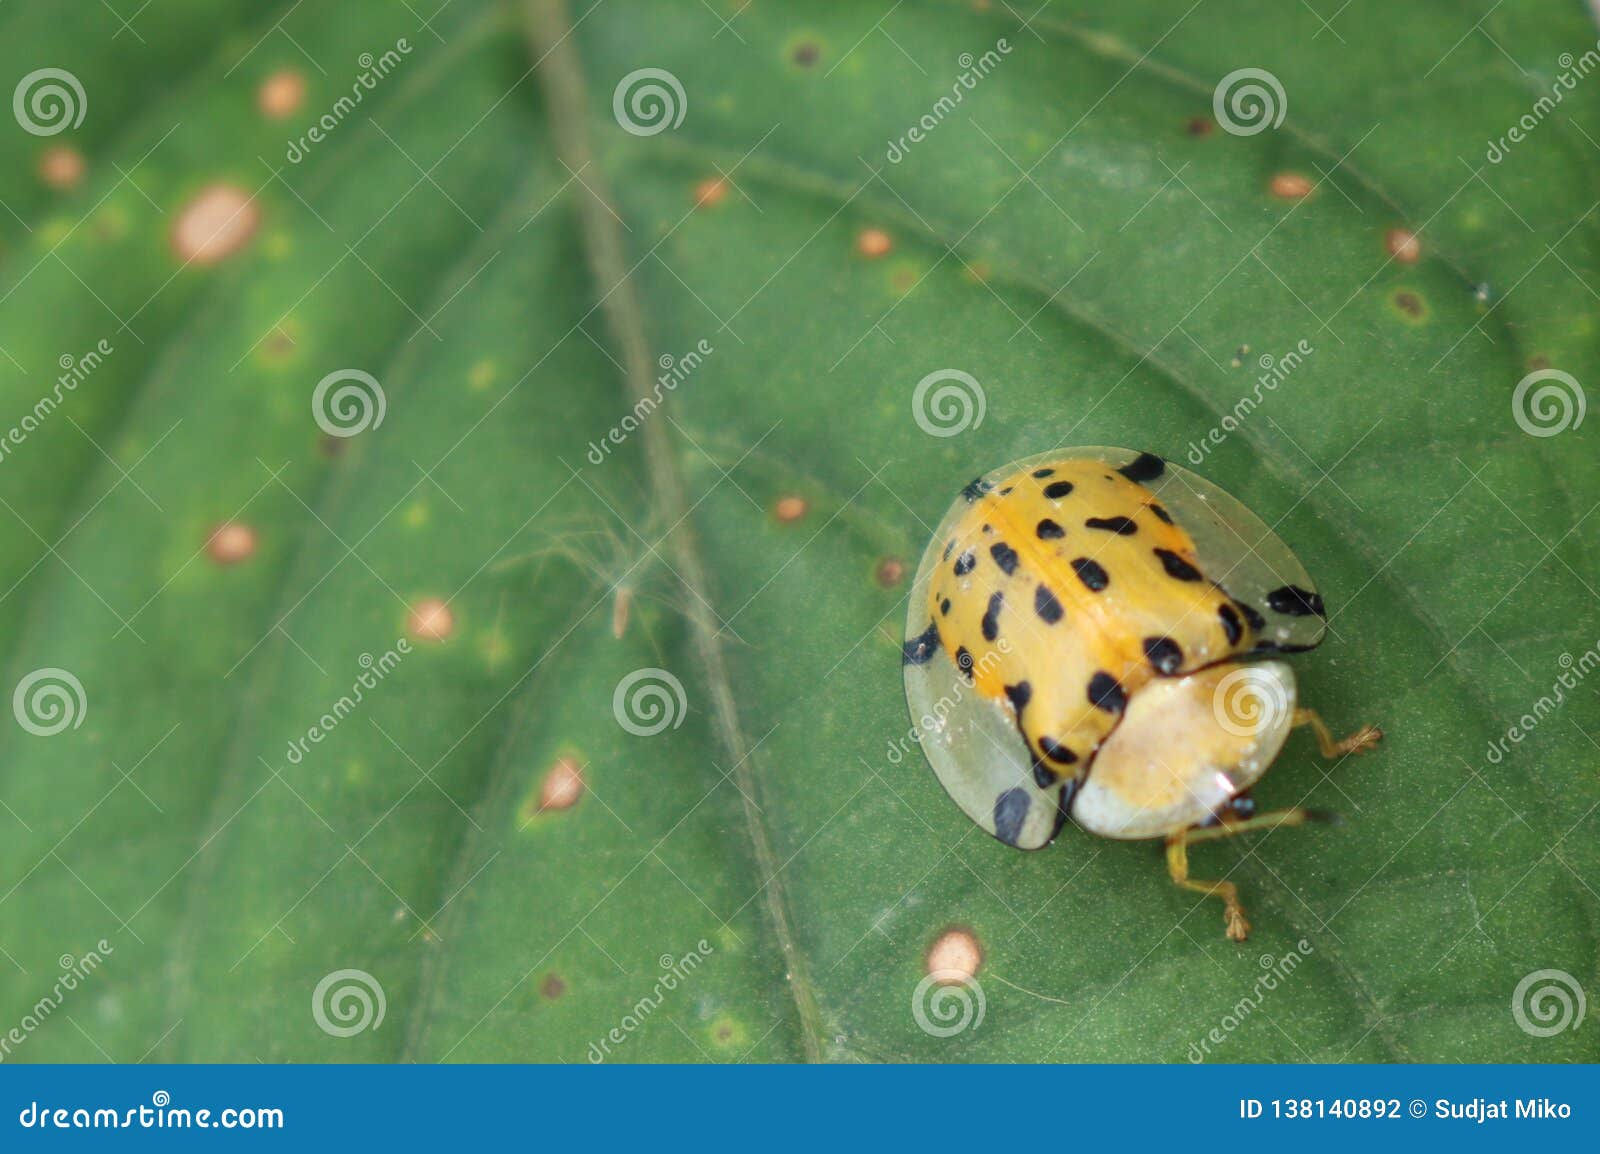 Beautiful Winged Insects. Animals that Can Fly. Perched on the Leaves,  Stock Photo - Image of beautifully, black: 138140892